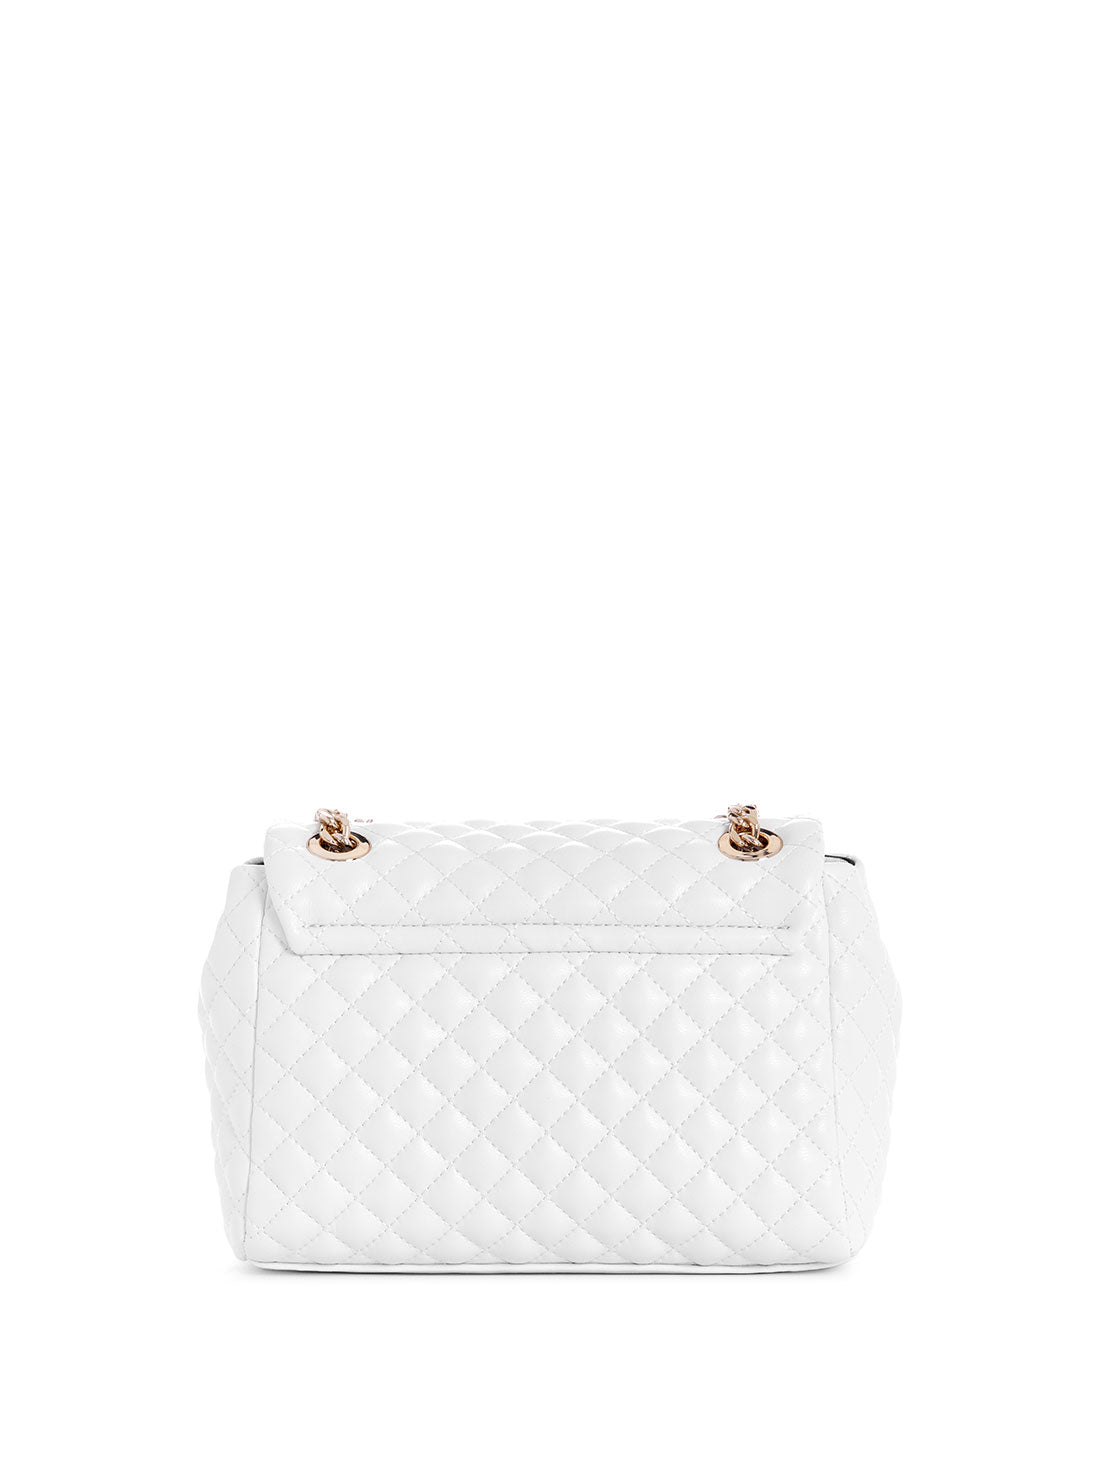 GUESS White Rianee Crossbody Flap Bag back view